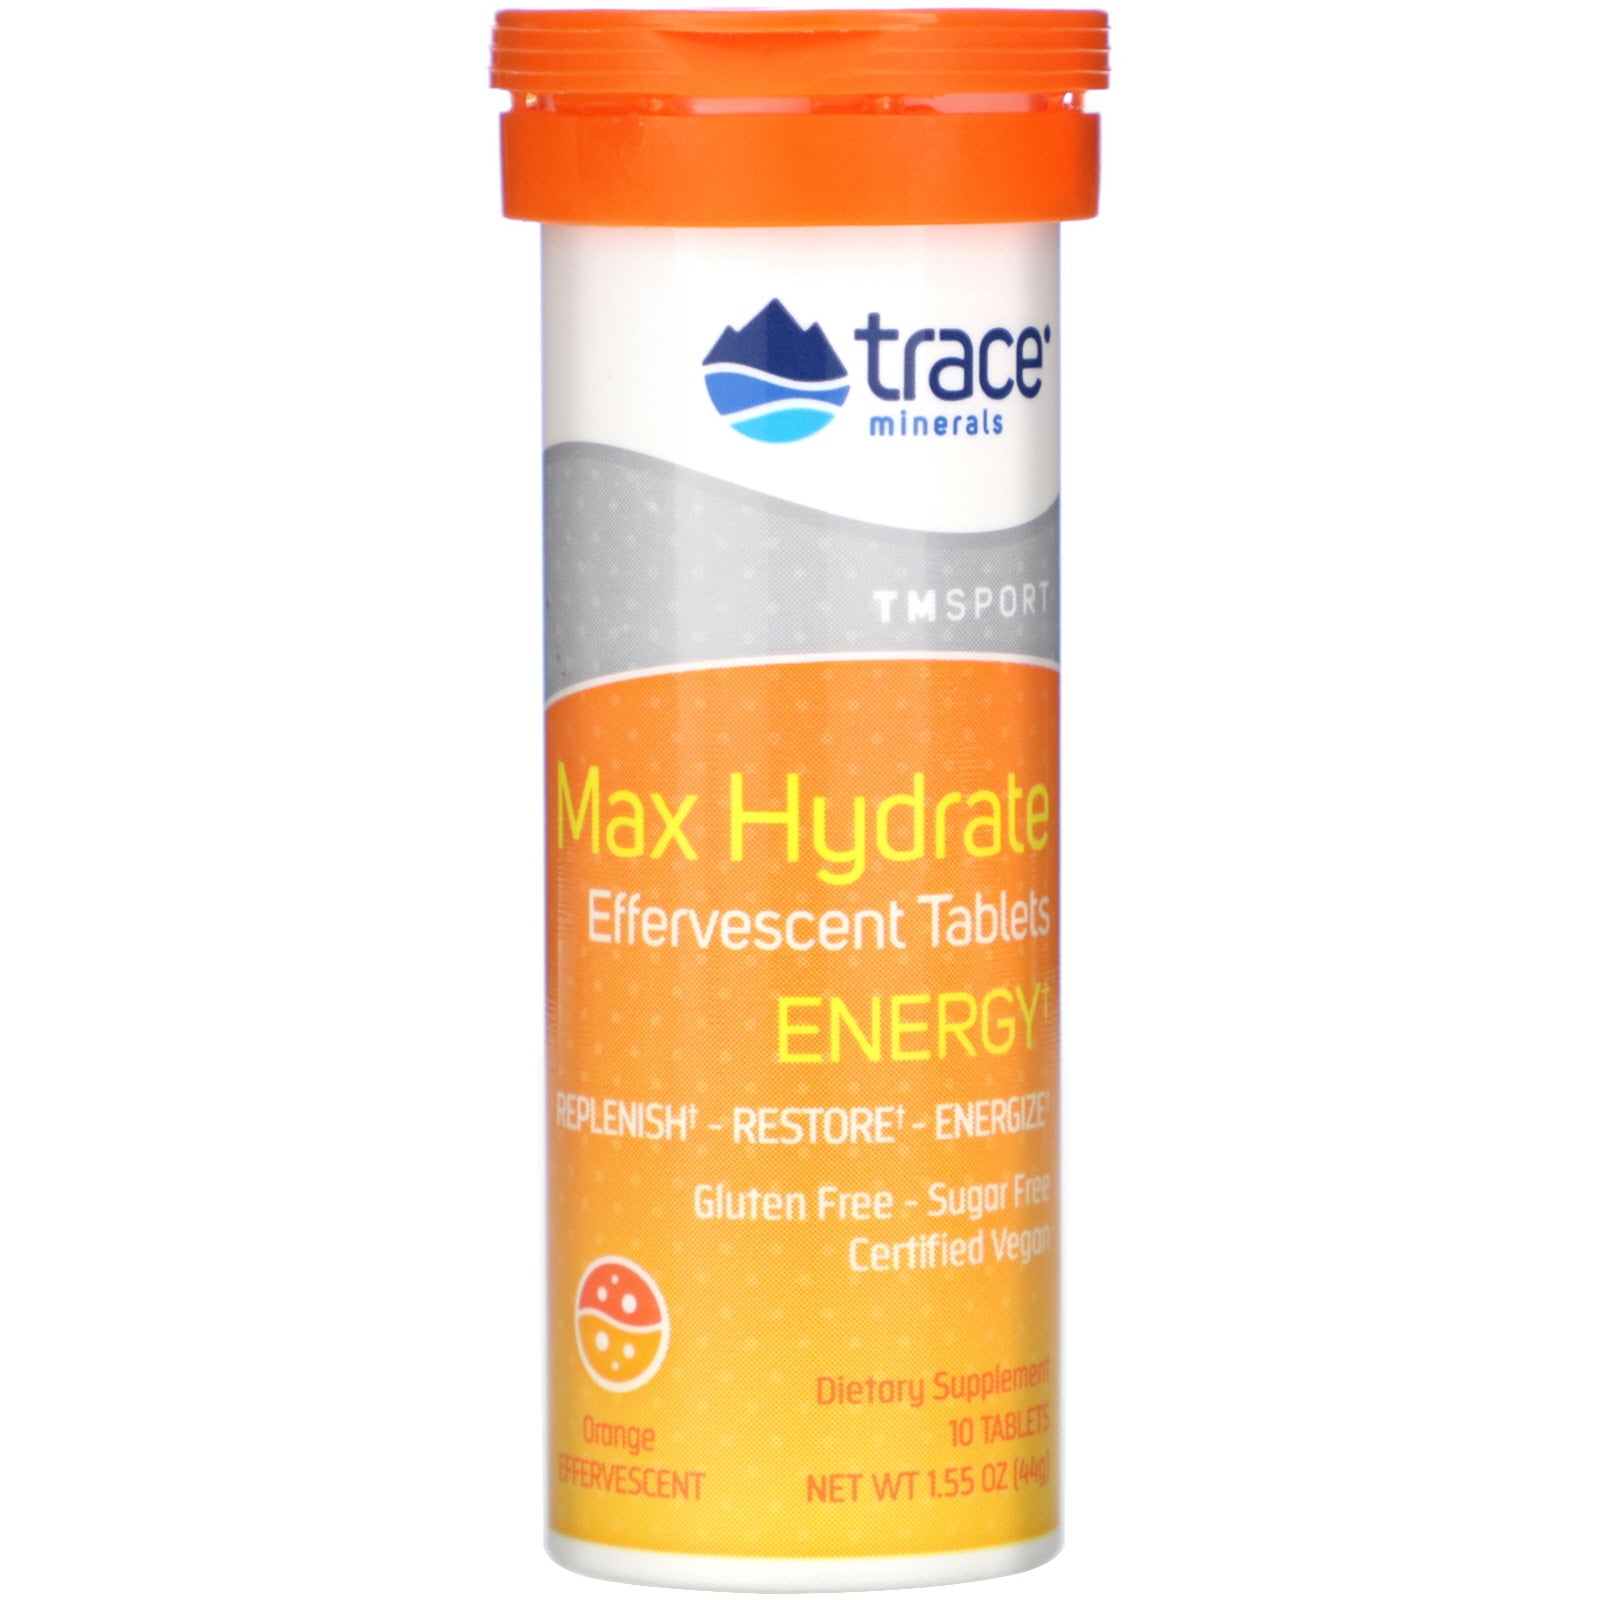 Maxhydrate energy Effervescent Tablets - Trace Minerals